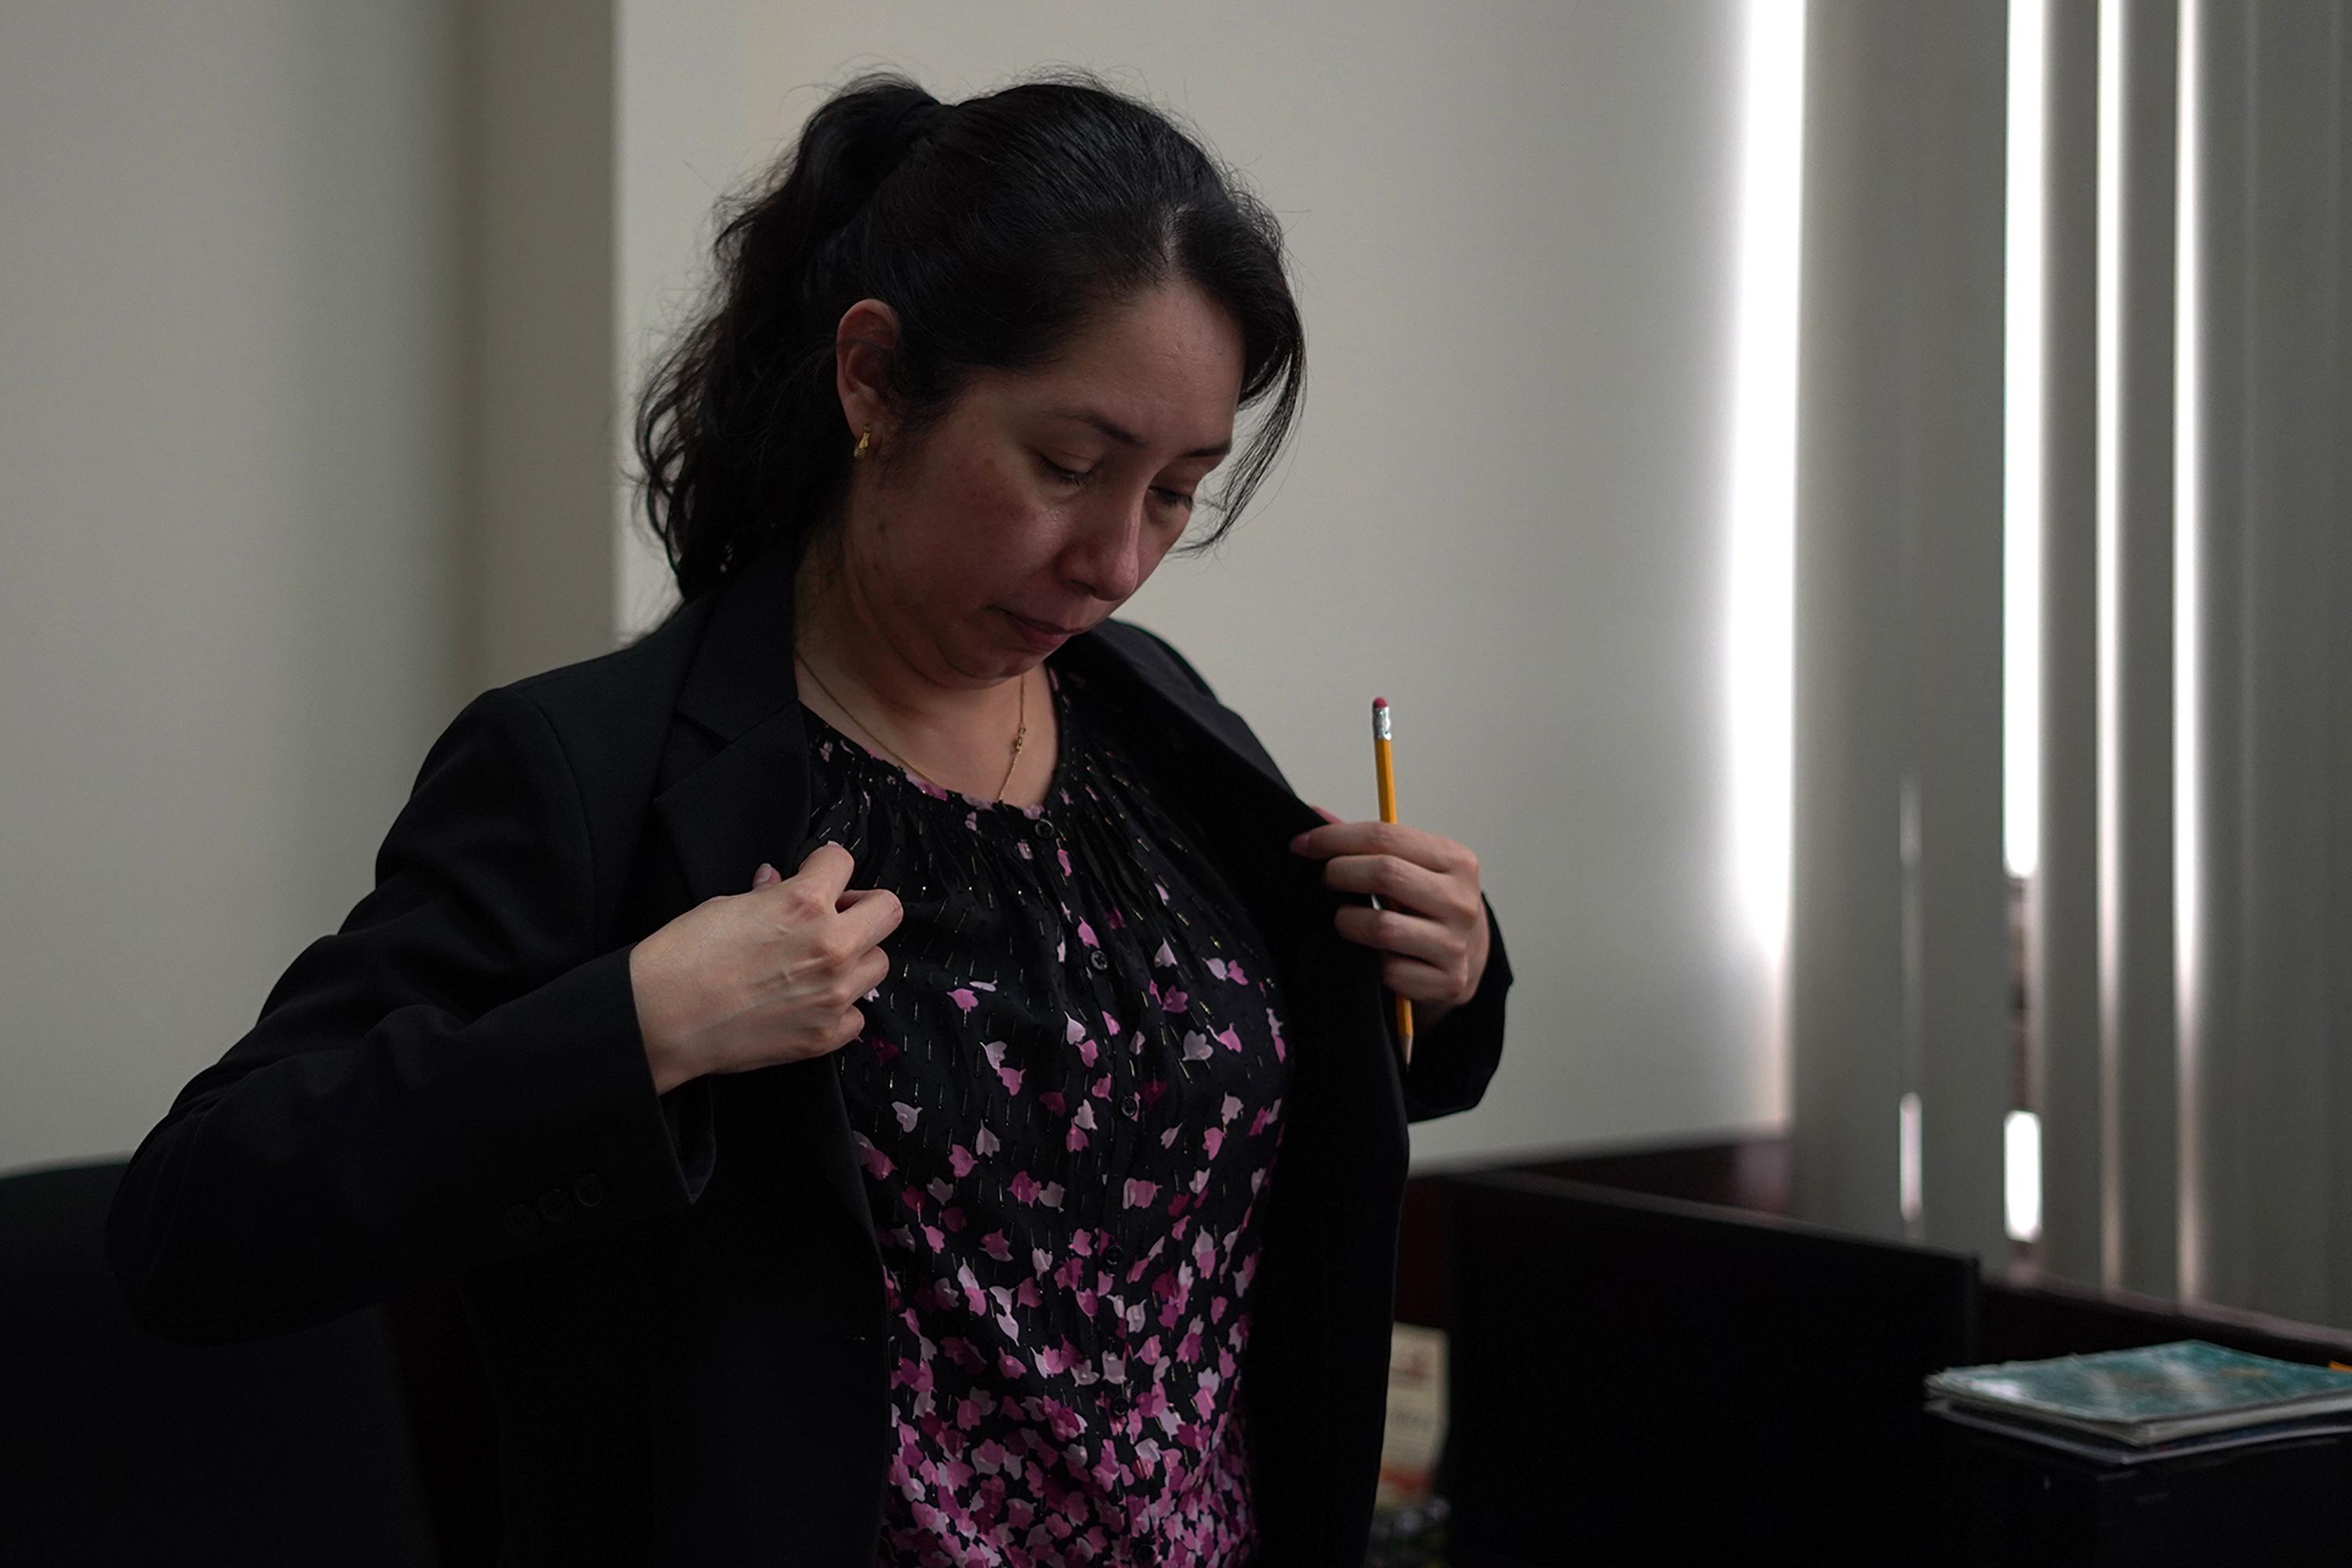 Erika Aifán during an interview with El Faro in February 2022 in her office in Guatemala City